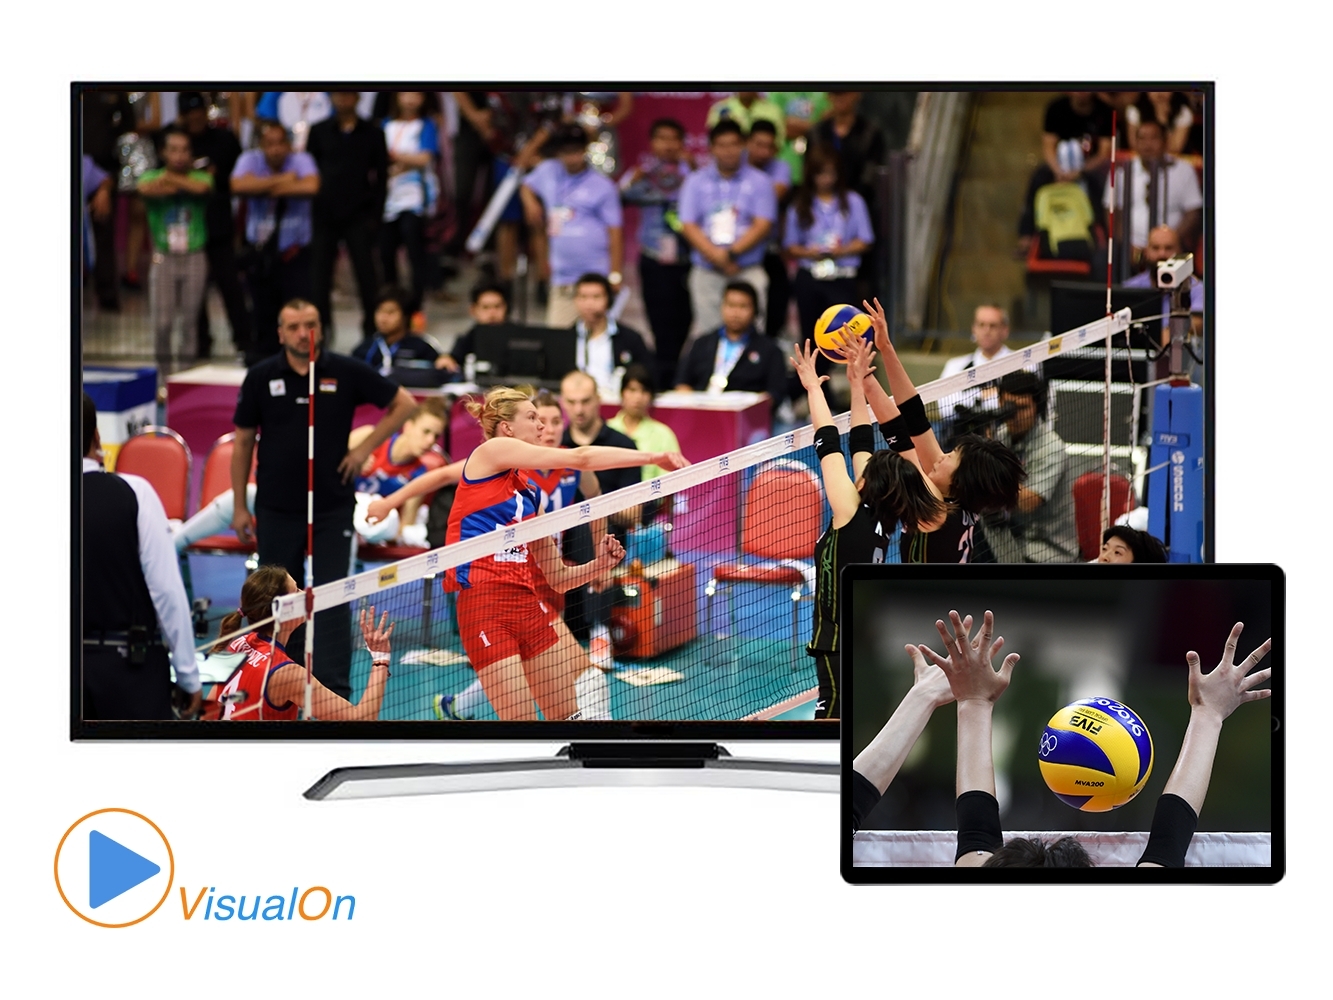 fivb volleyball tv